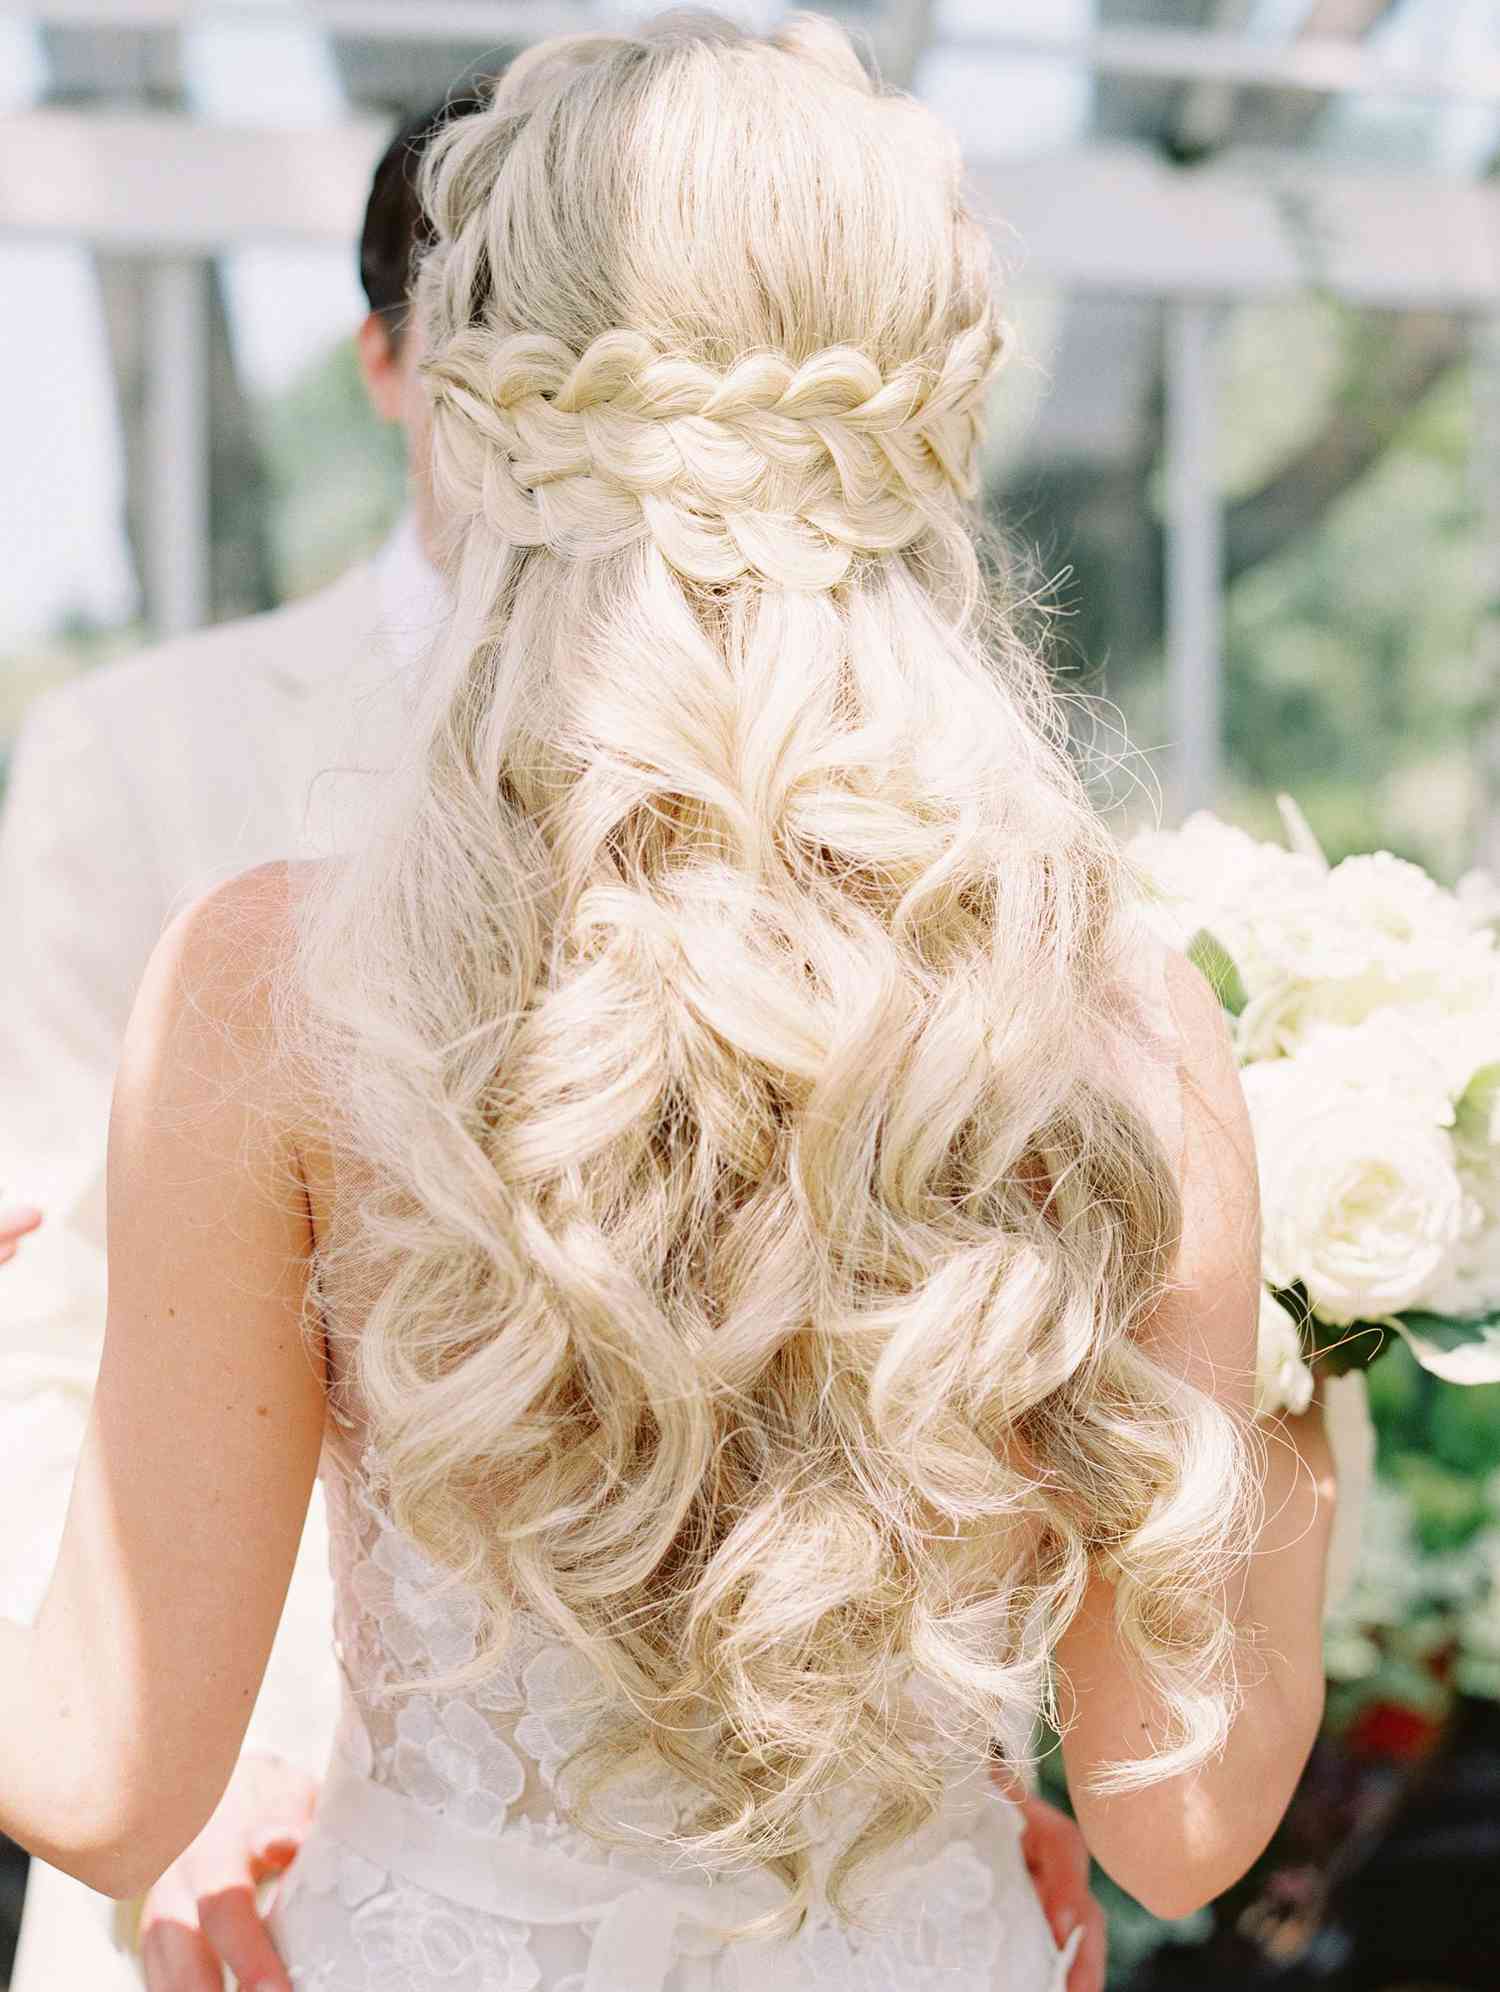 The Most Beautiful Wedding Hairstyles